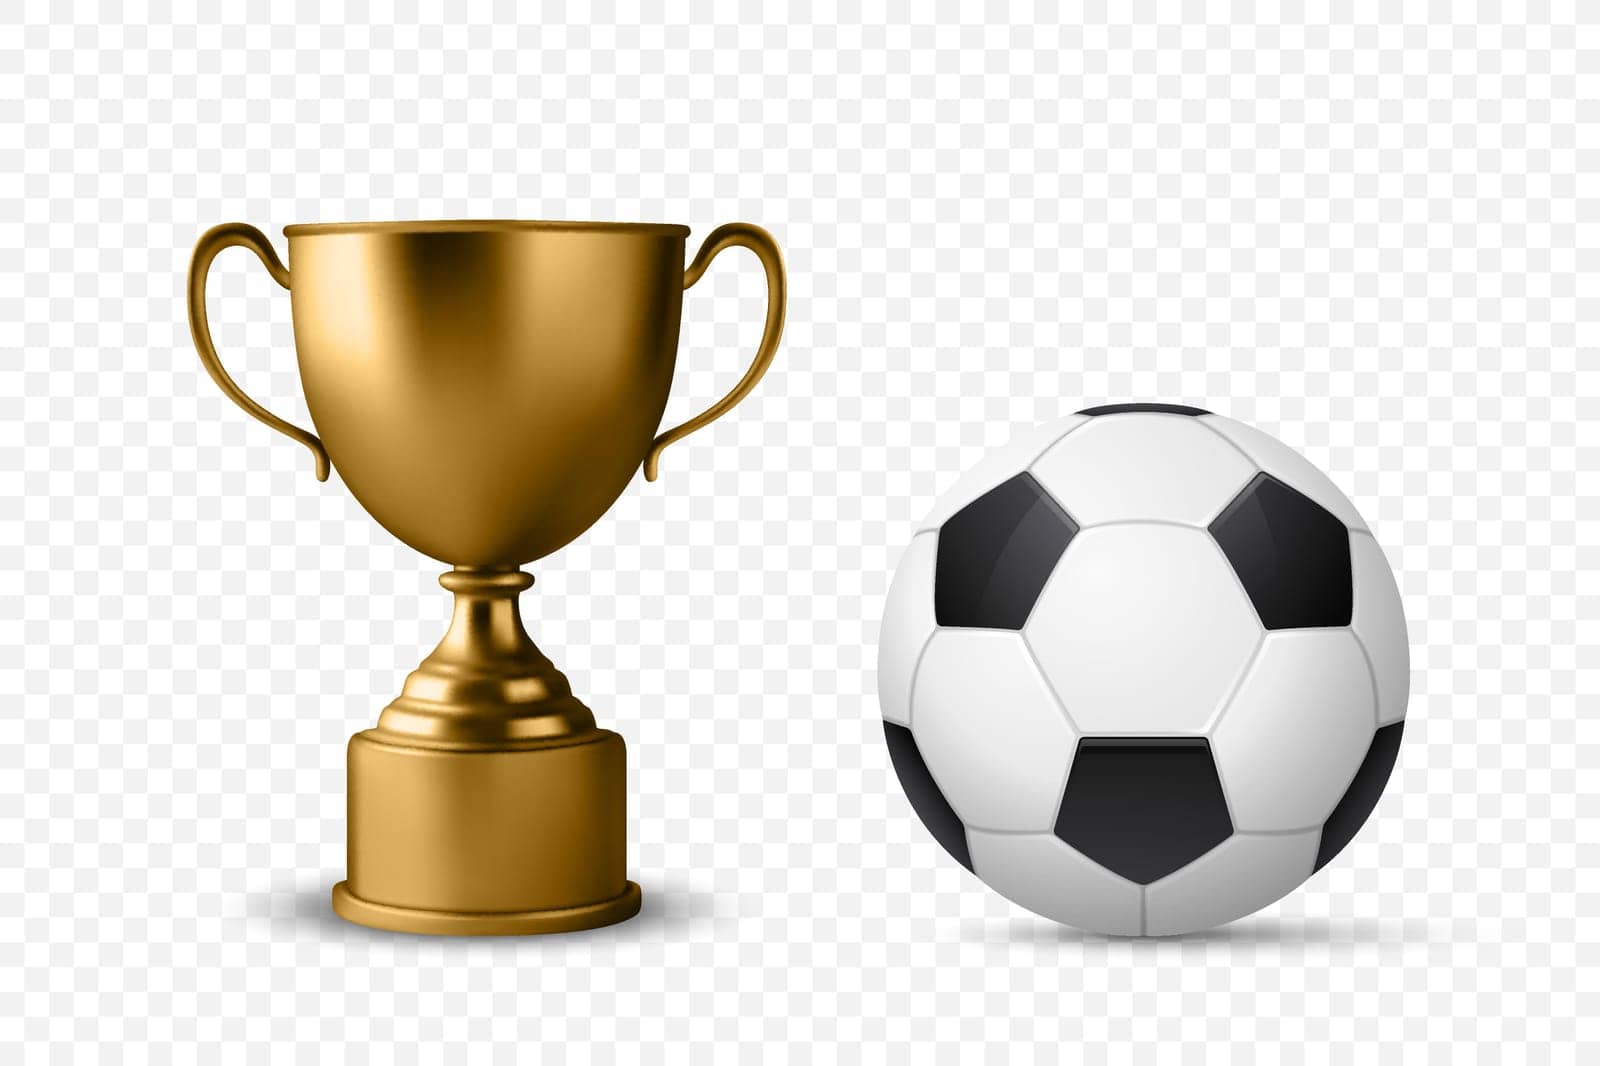 Realistic Vector 3d Blank Golden Champion Cup Icon with Soccer Ball Set Closeup Isolated. Design Template of Championship Trophy. Sports Awards and Victory Celebrations Concept by Gomolach